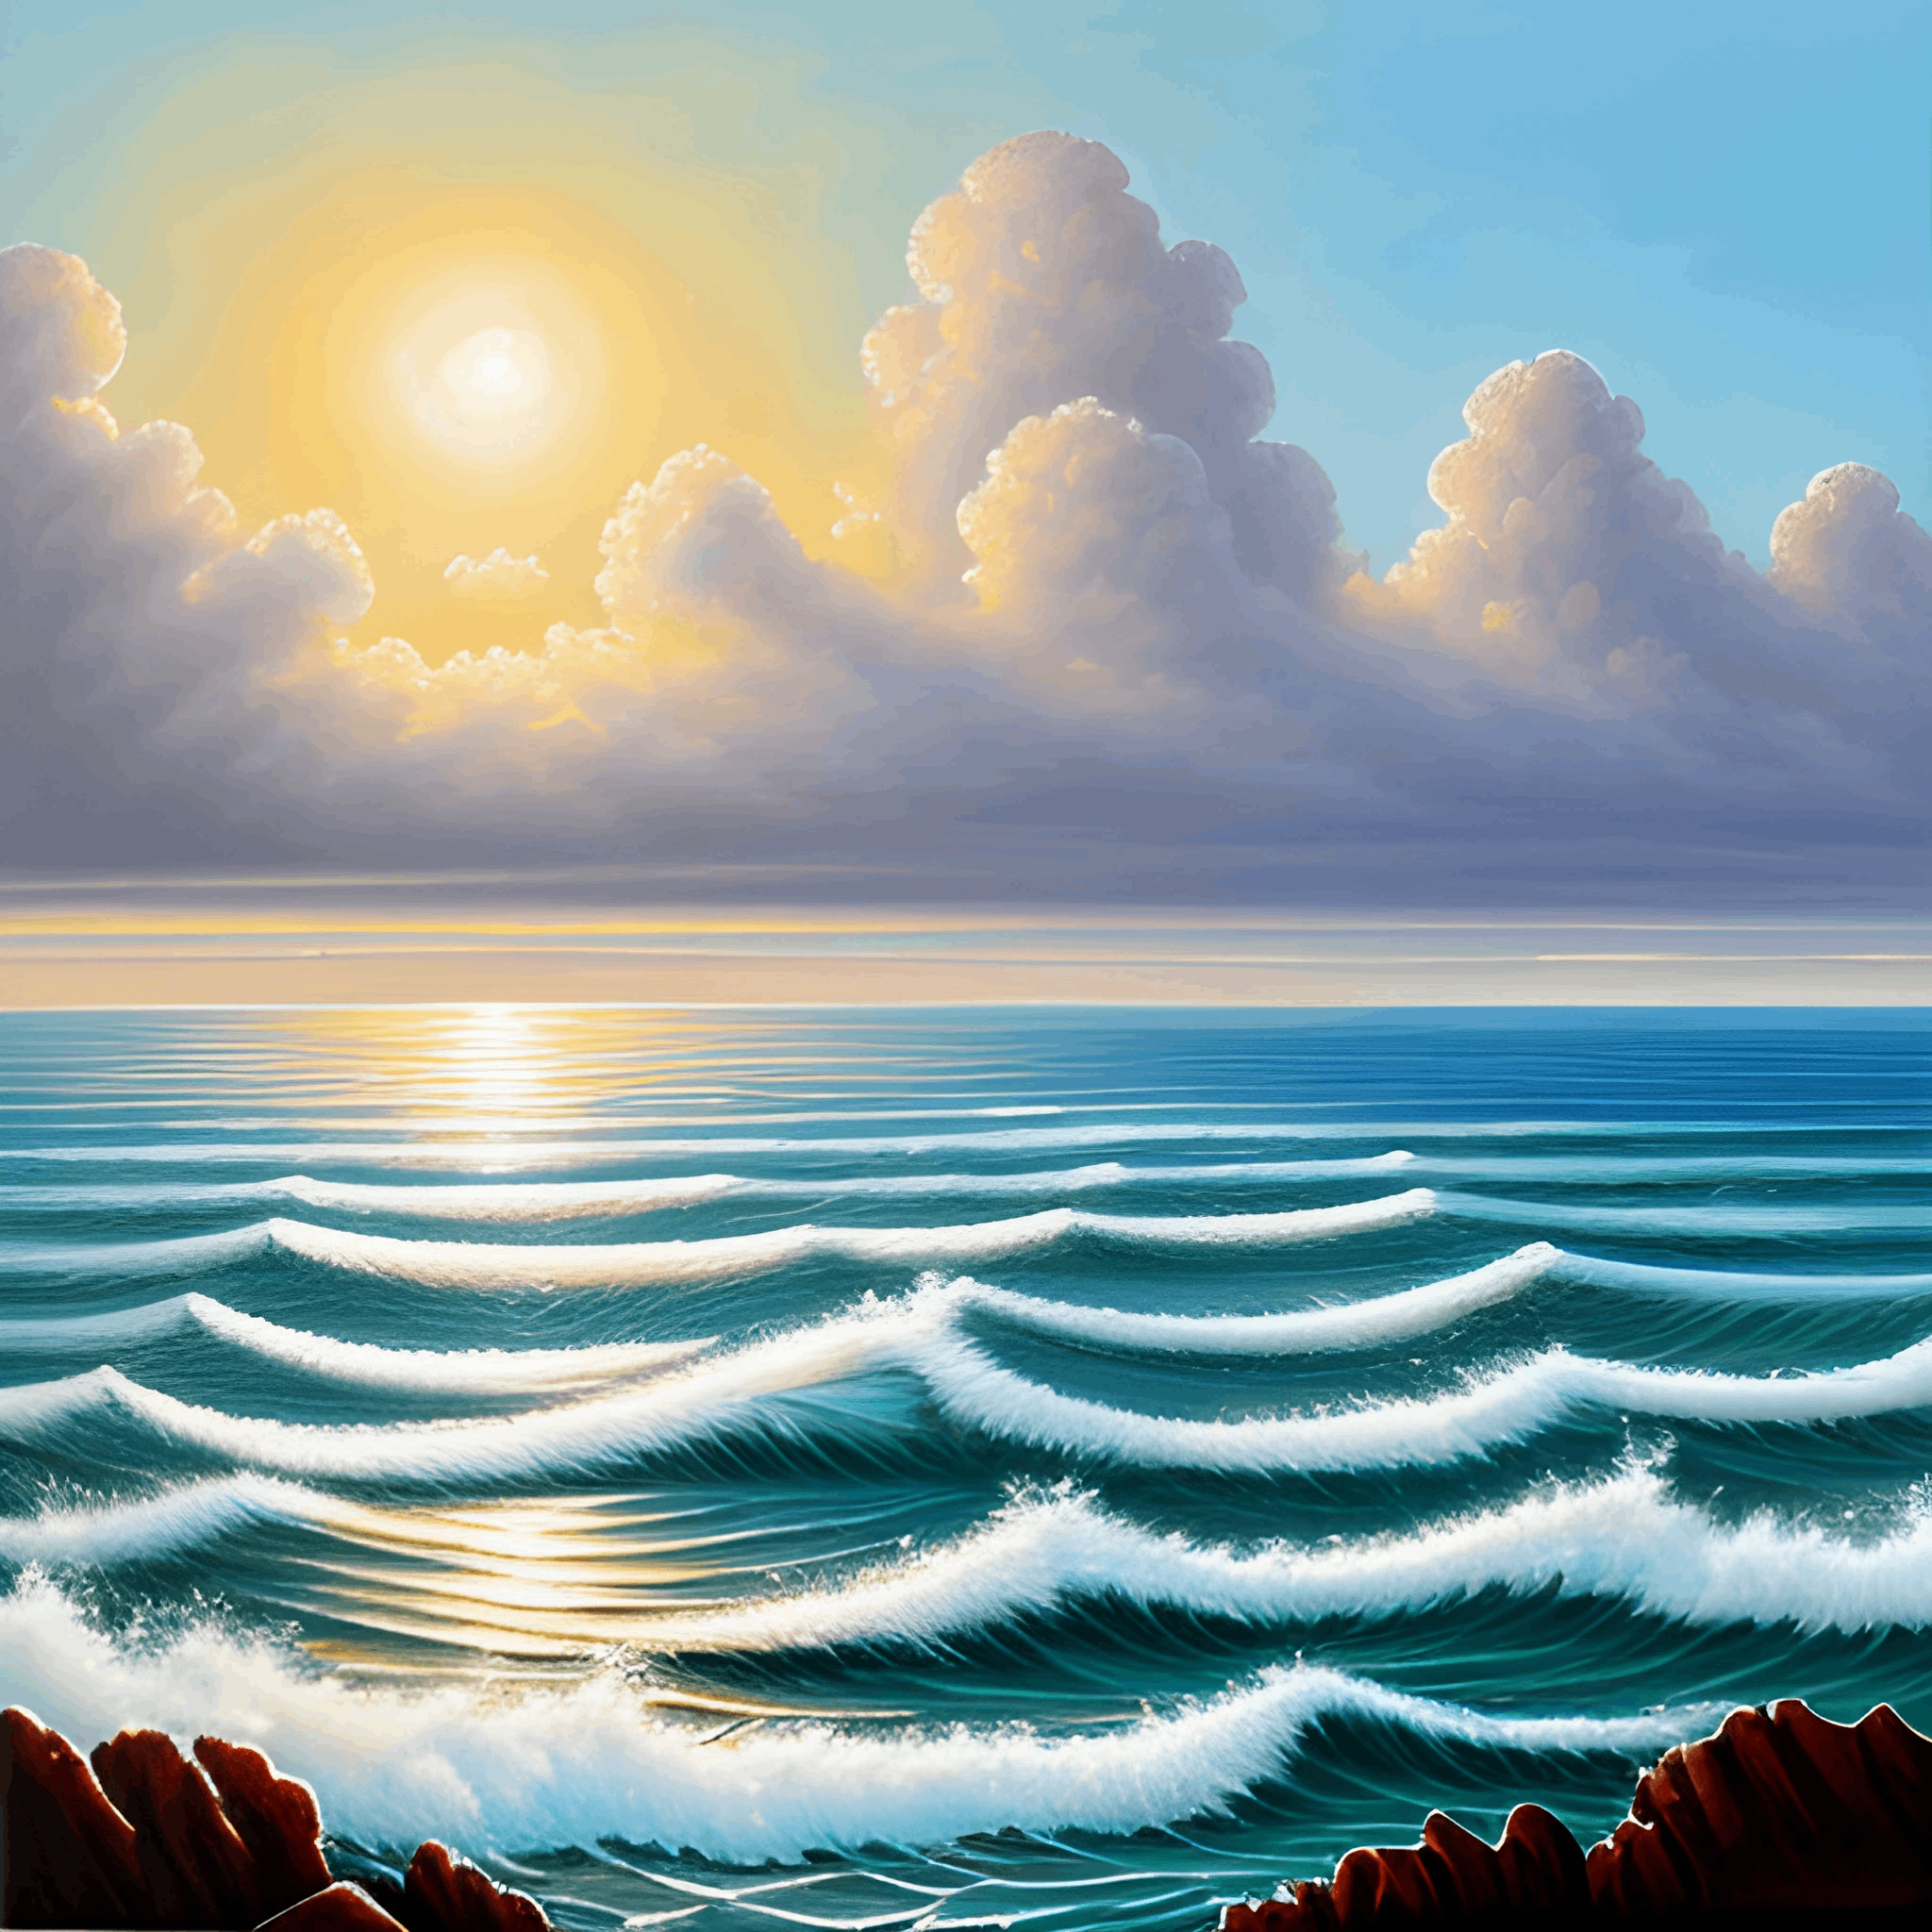 painting of a sunset over the ocean with waves and rocks